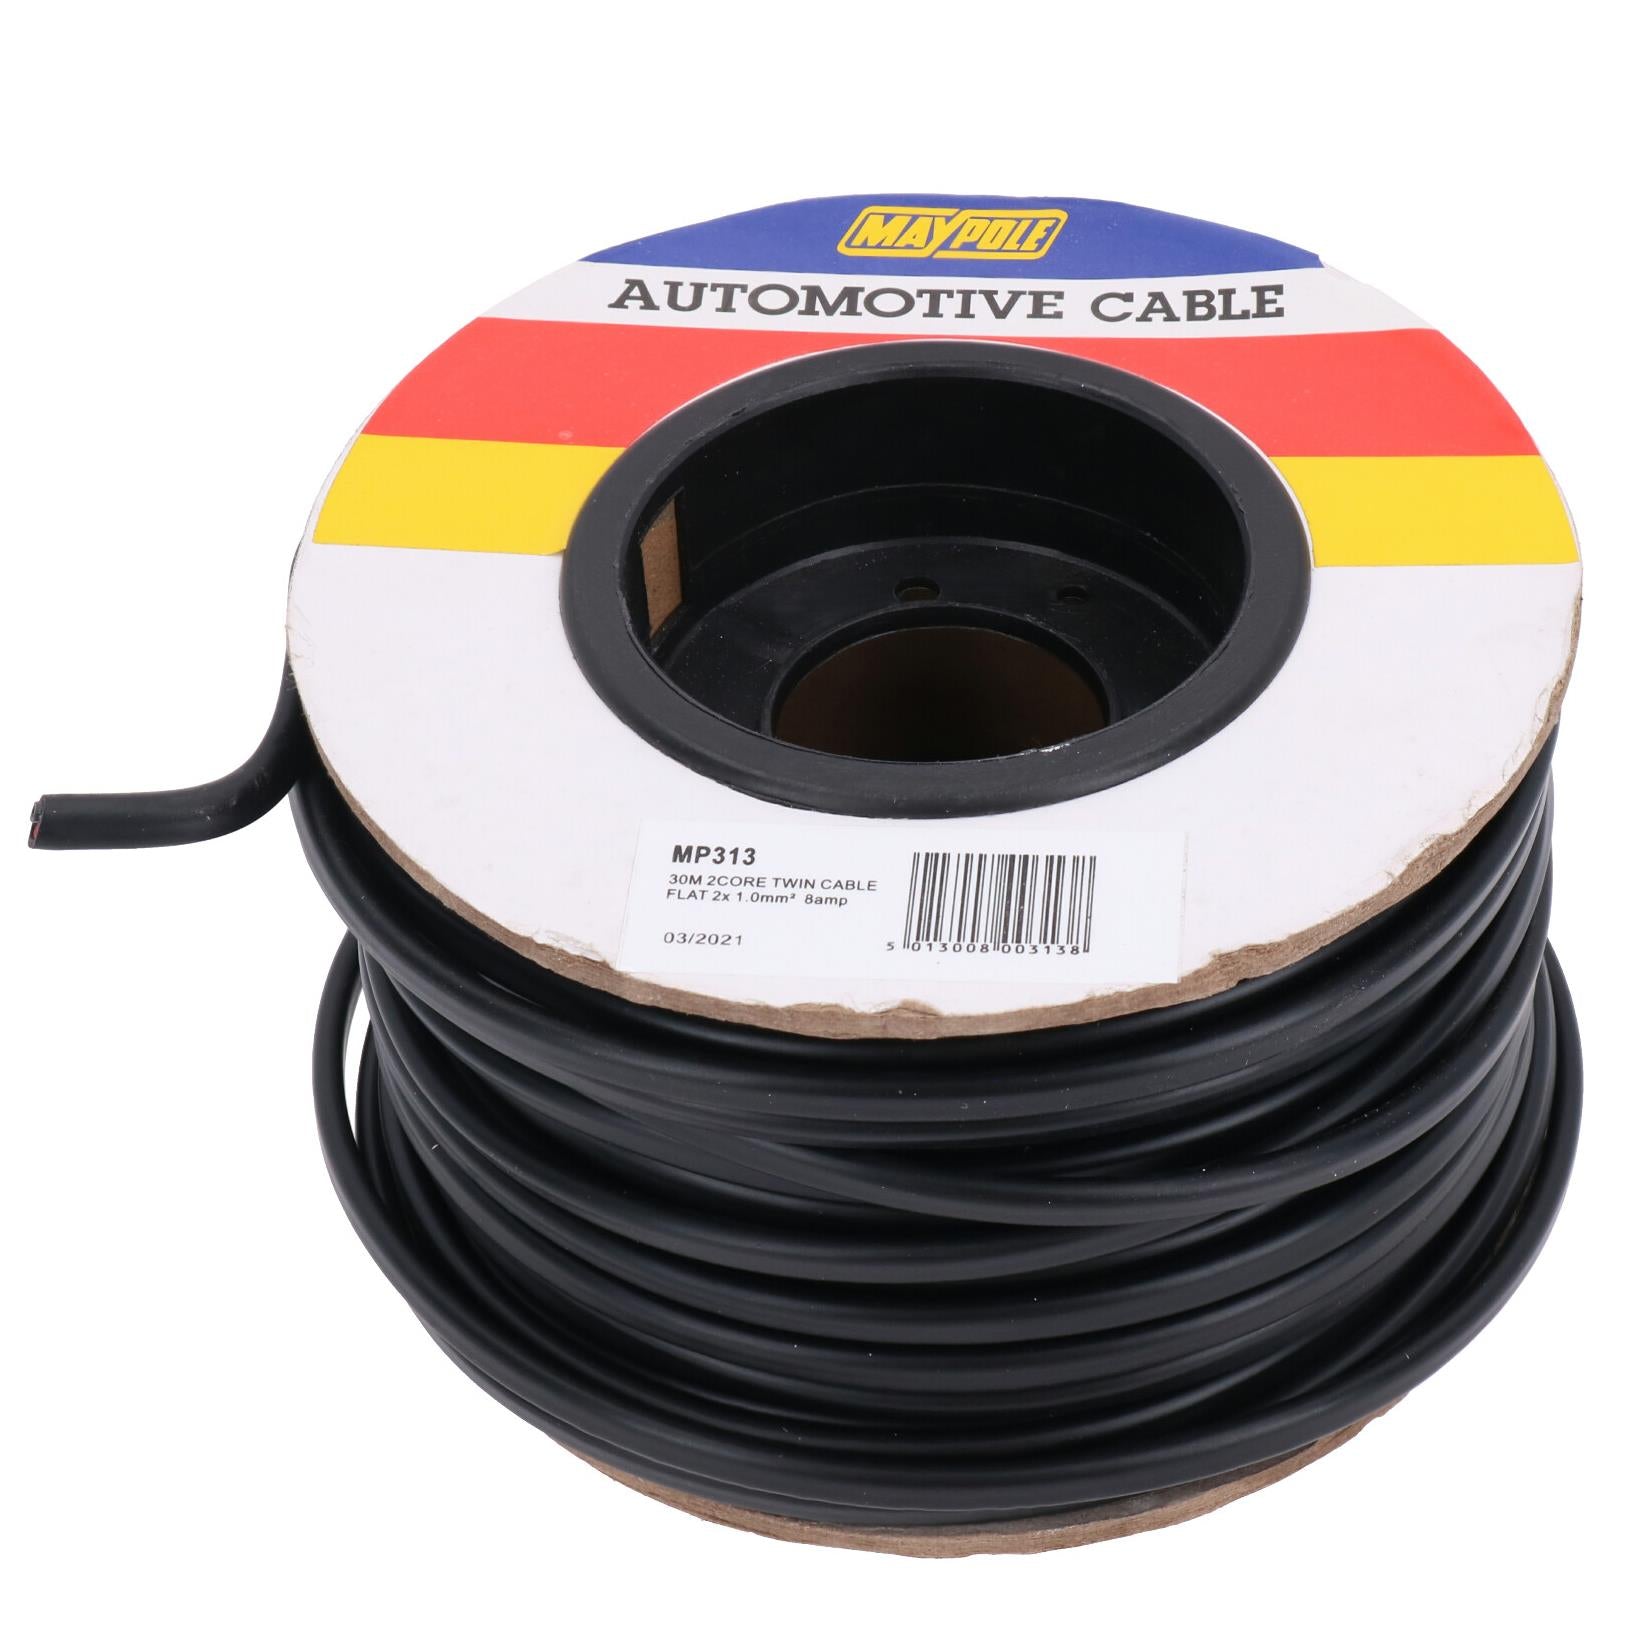 30m Roll Twin Core Automotive Cable / Wire for Car, Trailer etc TR103